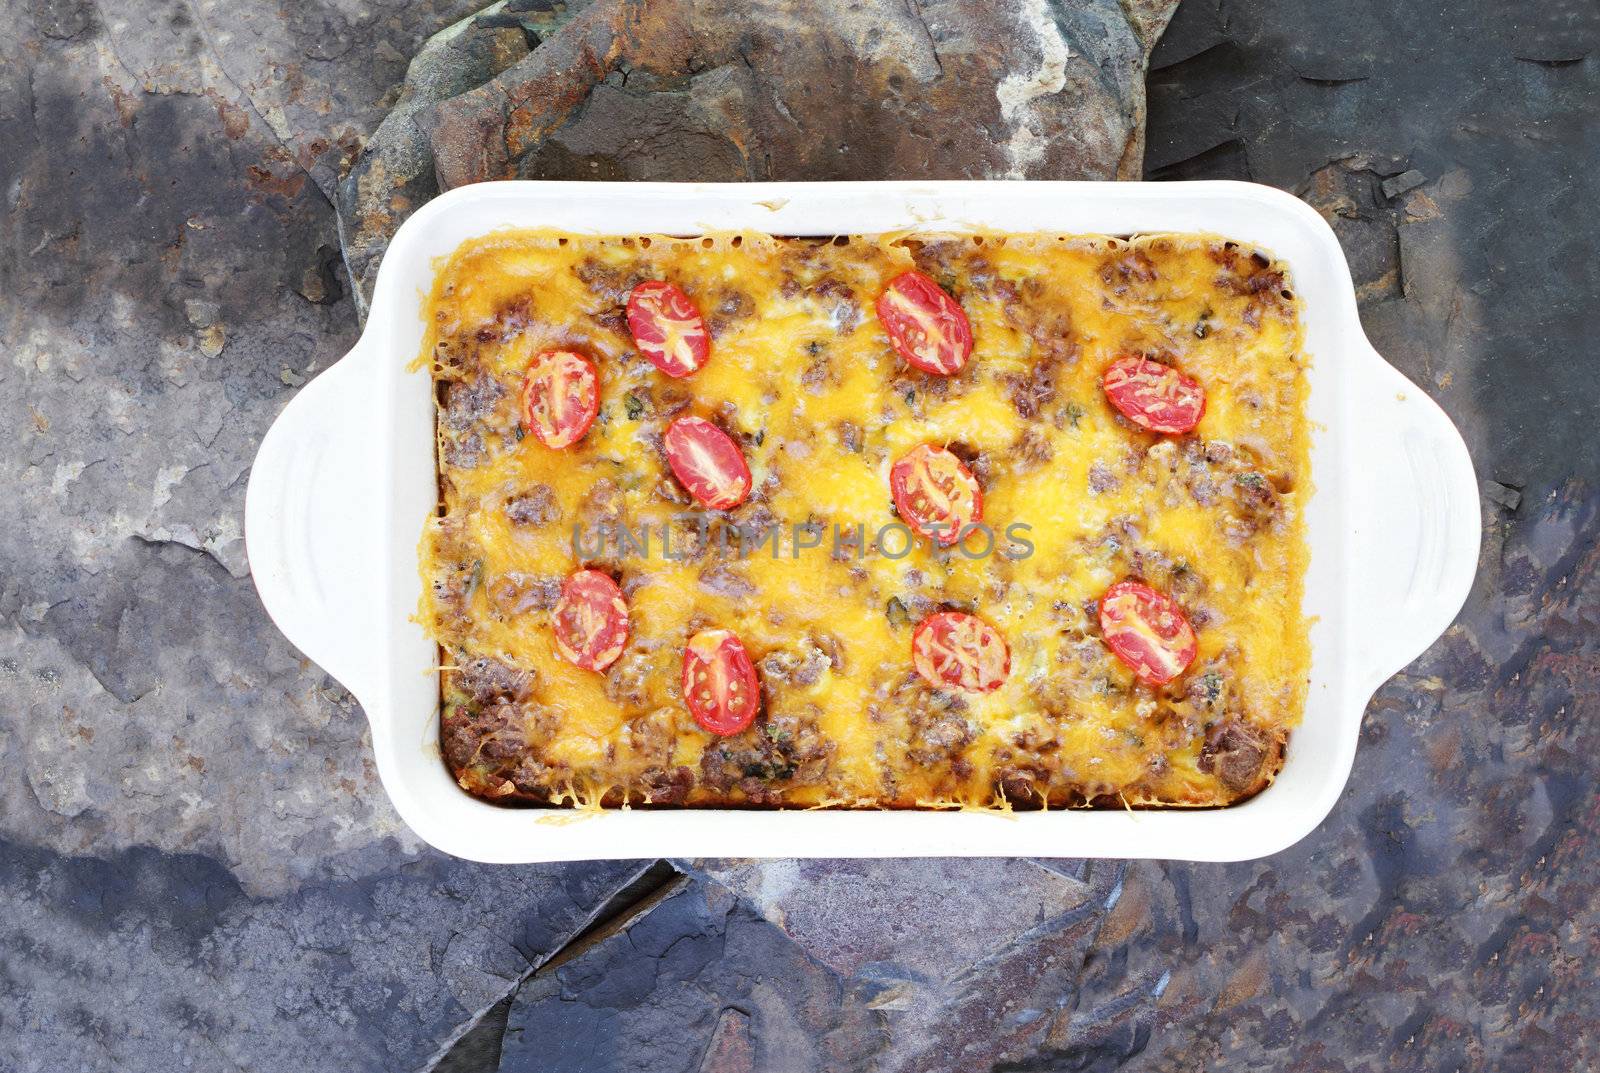 Hash Brown Strata or Breakfast Casserole made with a crust of hash browns, eggs, sausage and cheddar cheese.
